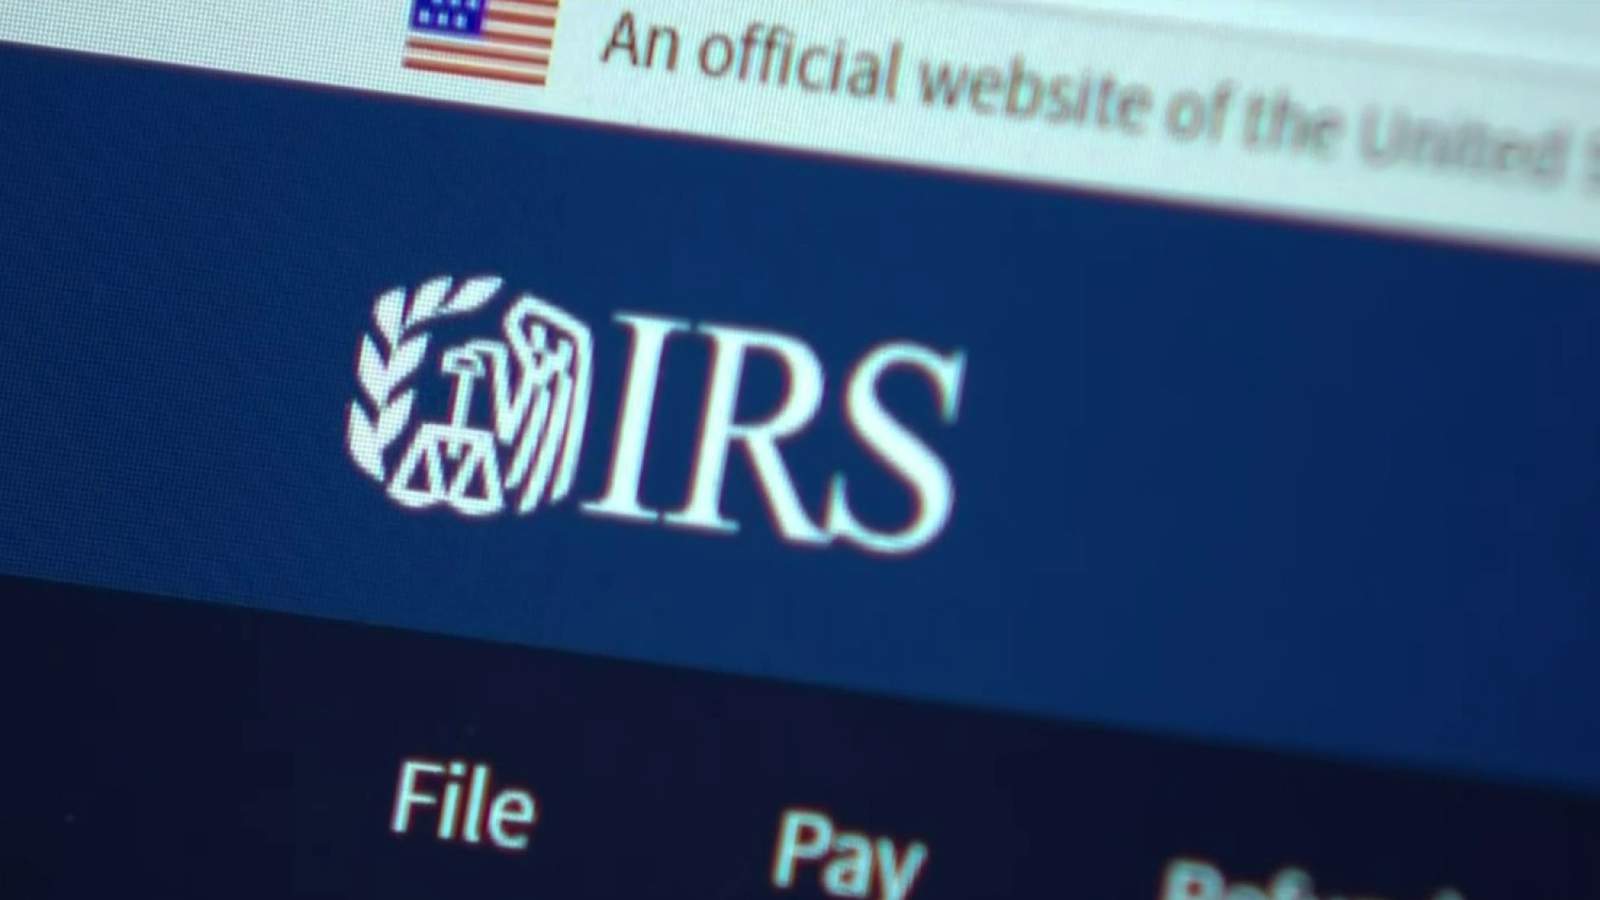 Treasury, IRS launch new tool to help non-filers register for Economic Impact Payments